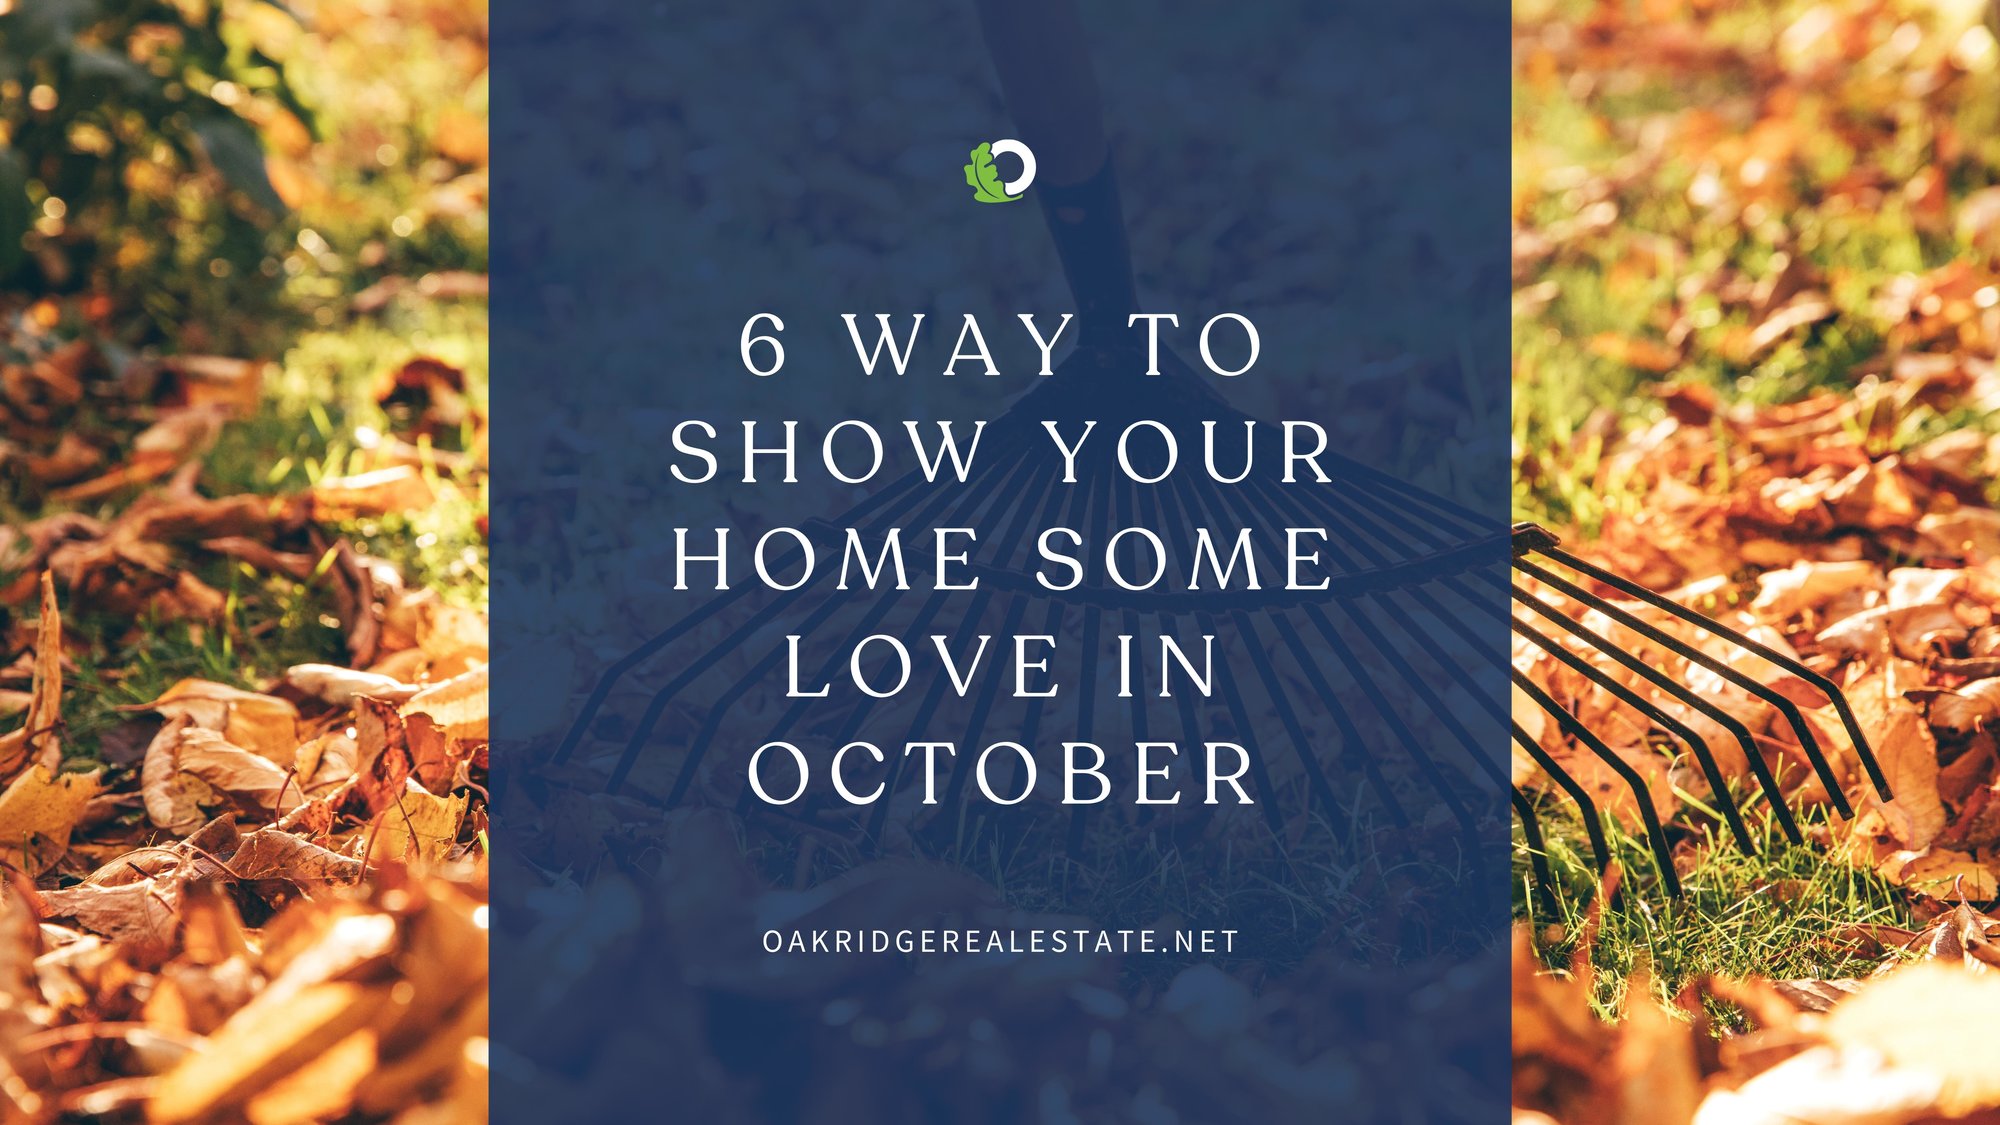 6 Way to Show Your Home Some Love in October | Oakridge Real Estate